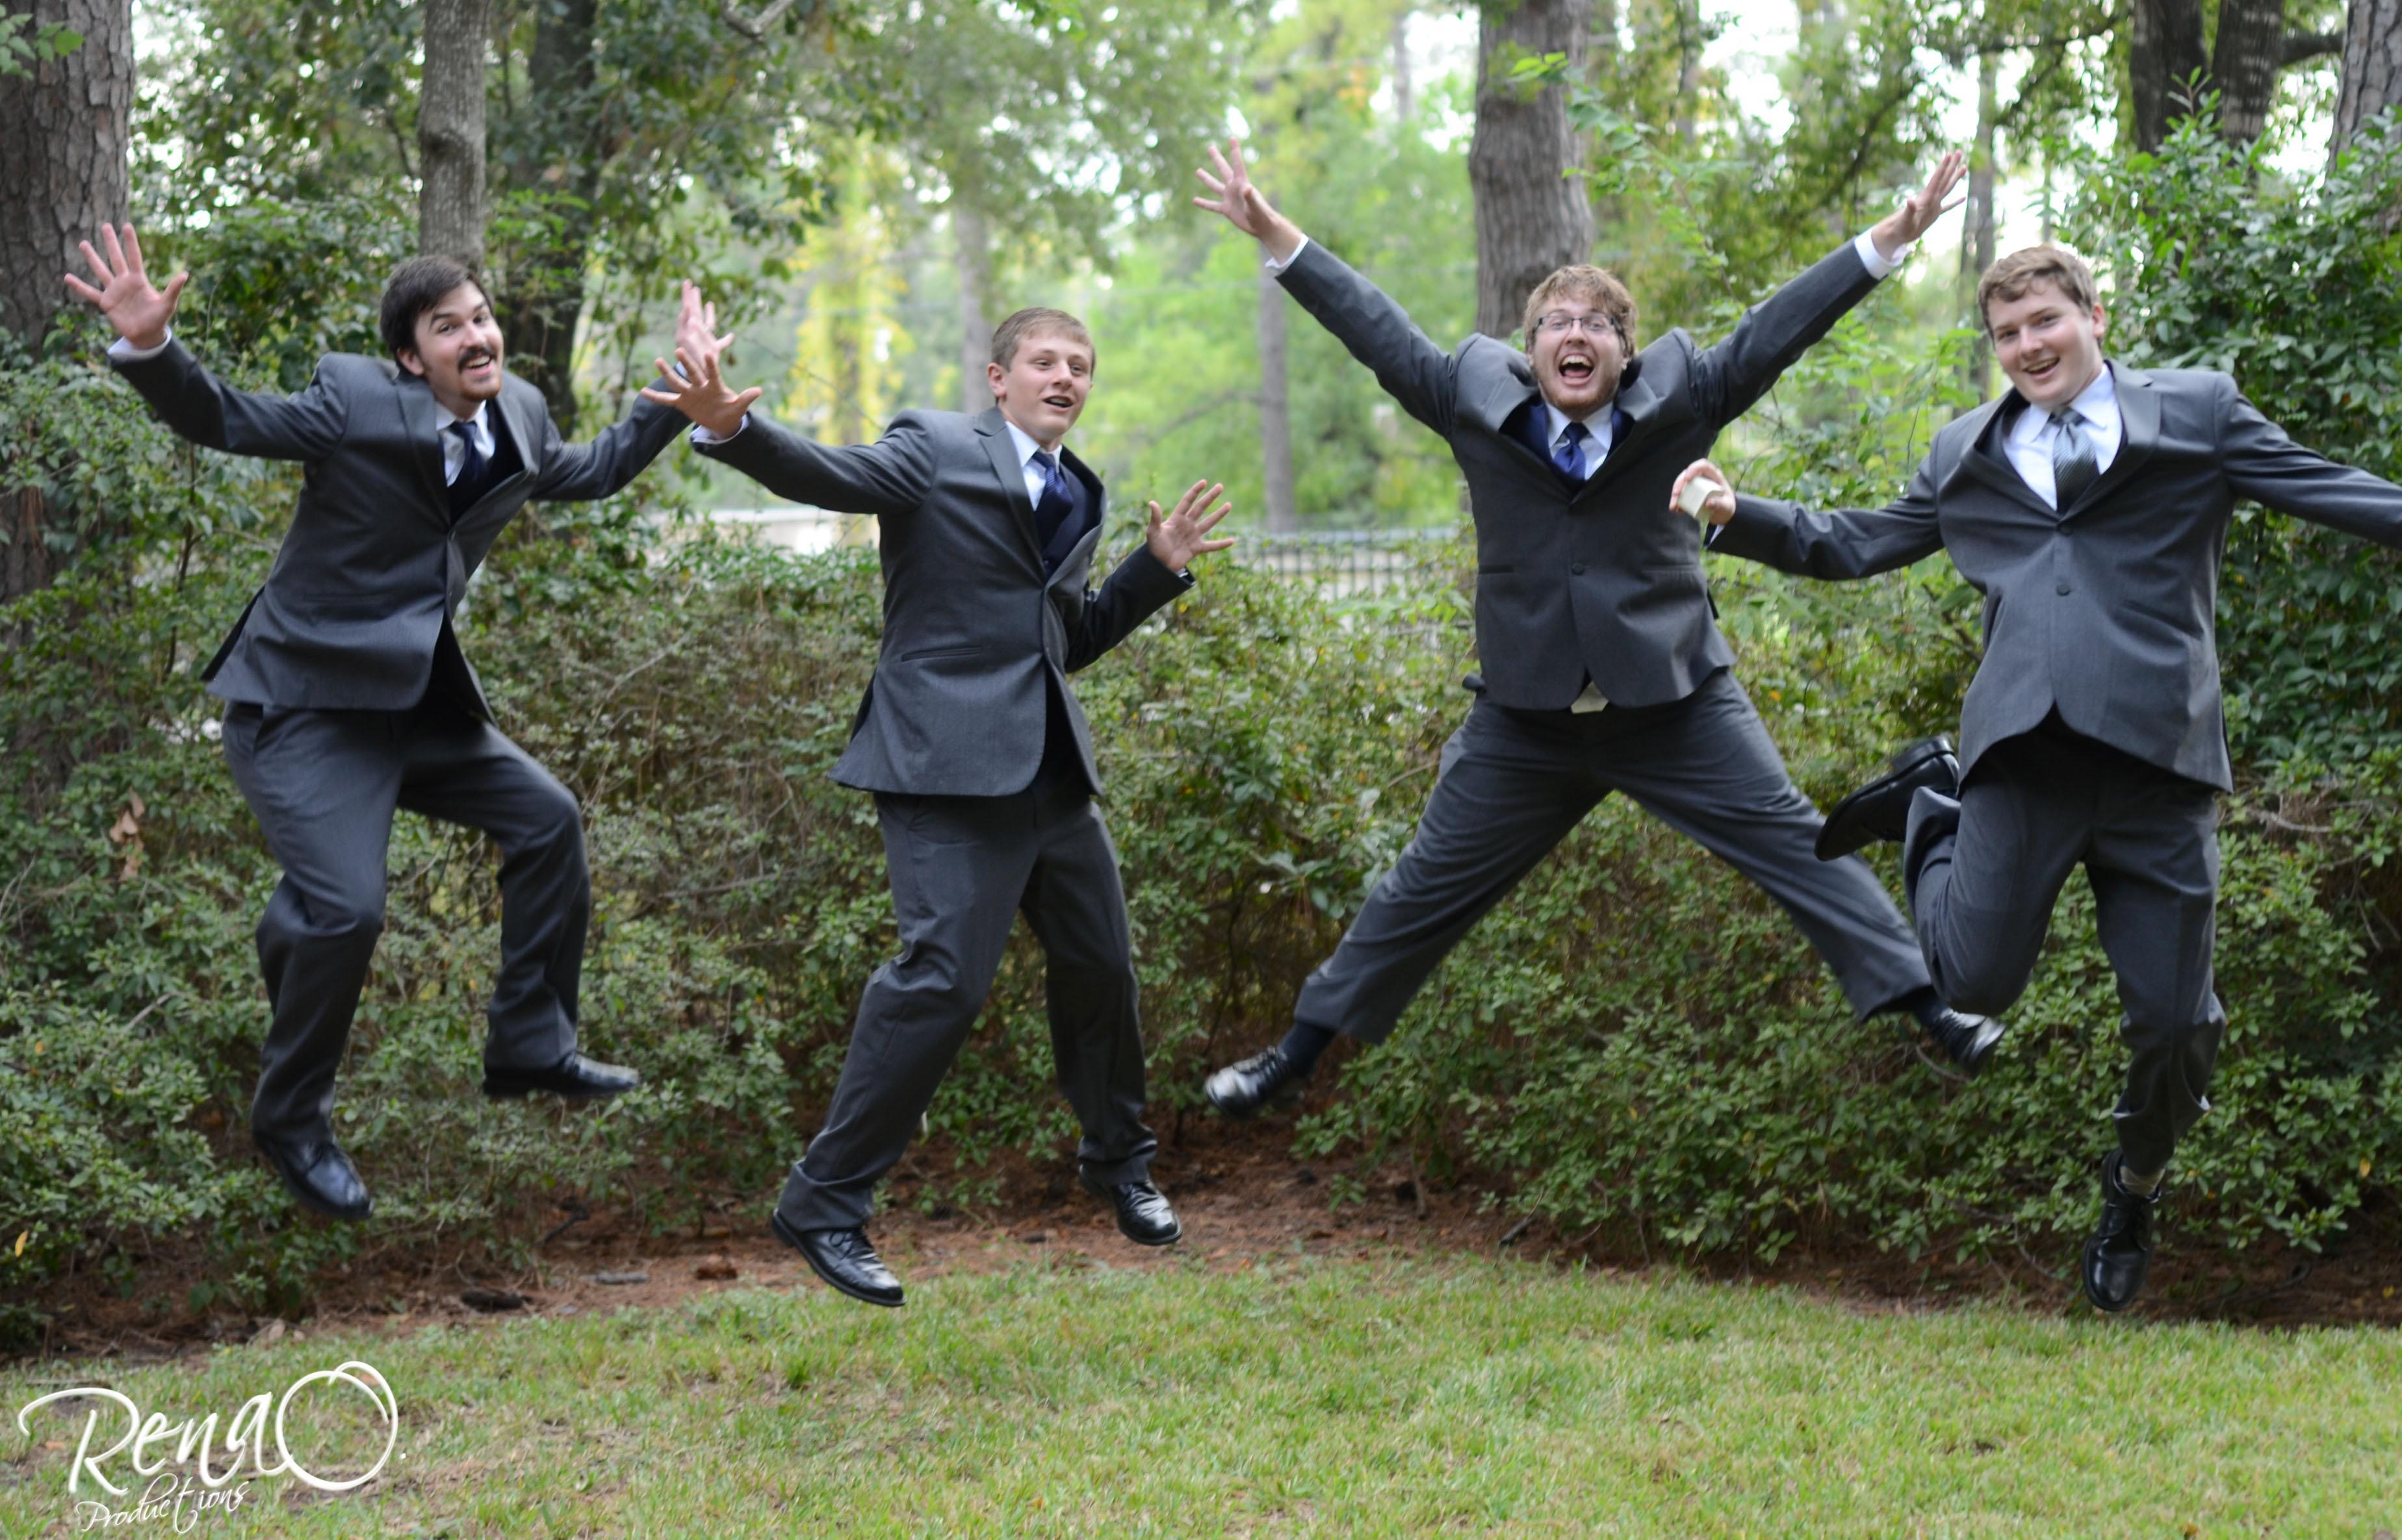 I capture the personality of each and every client. What is a wedding without a little fun?